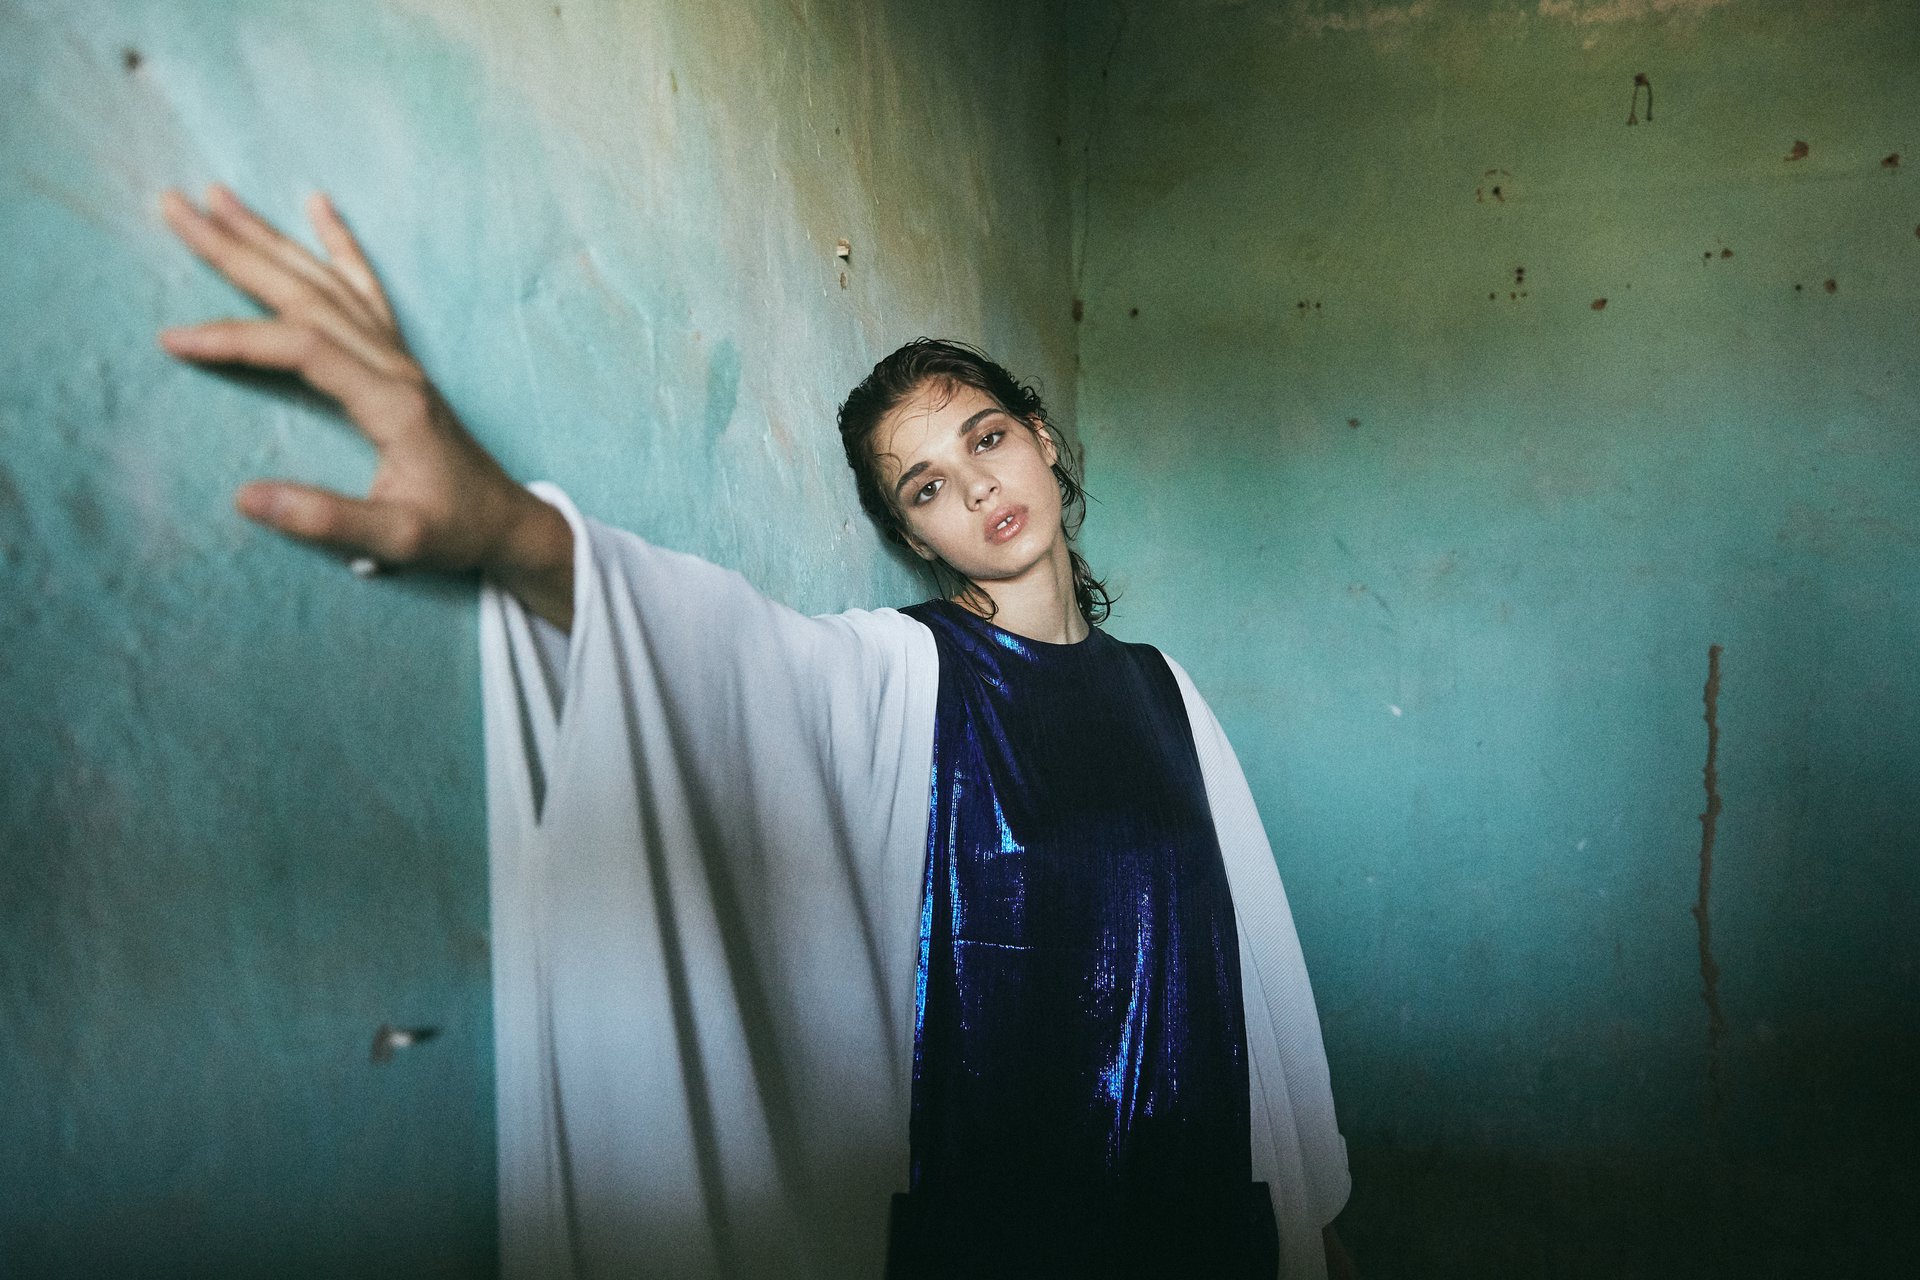 Woman standing against a wall with her arm outstretched, wearing a blue dress and abaya.